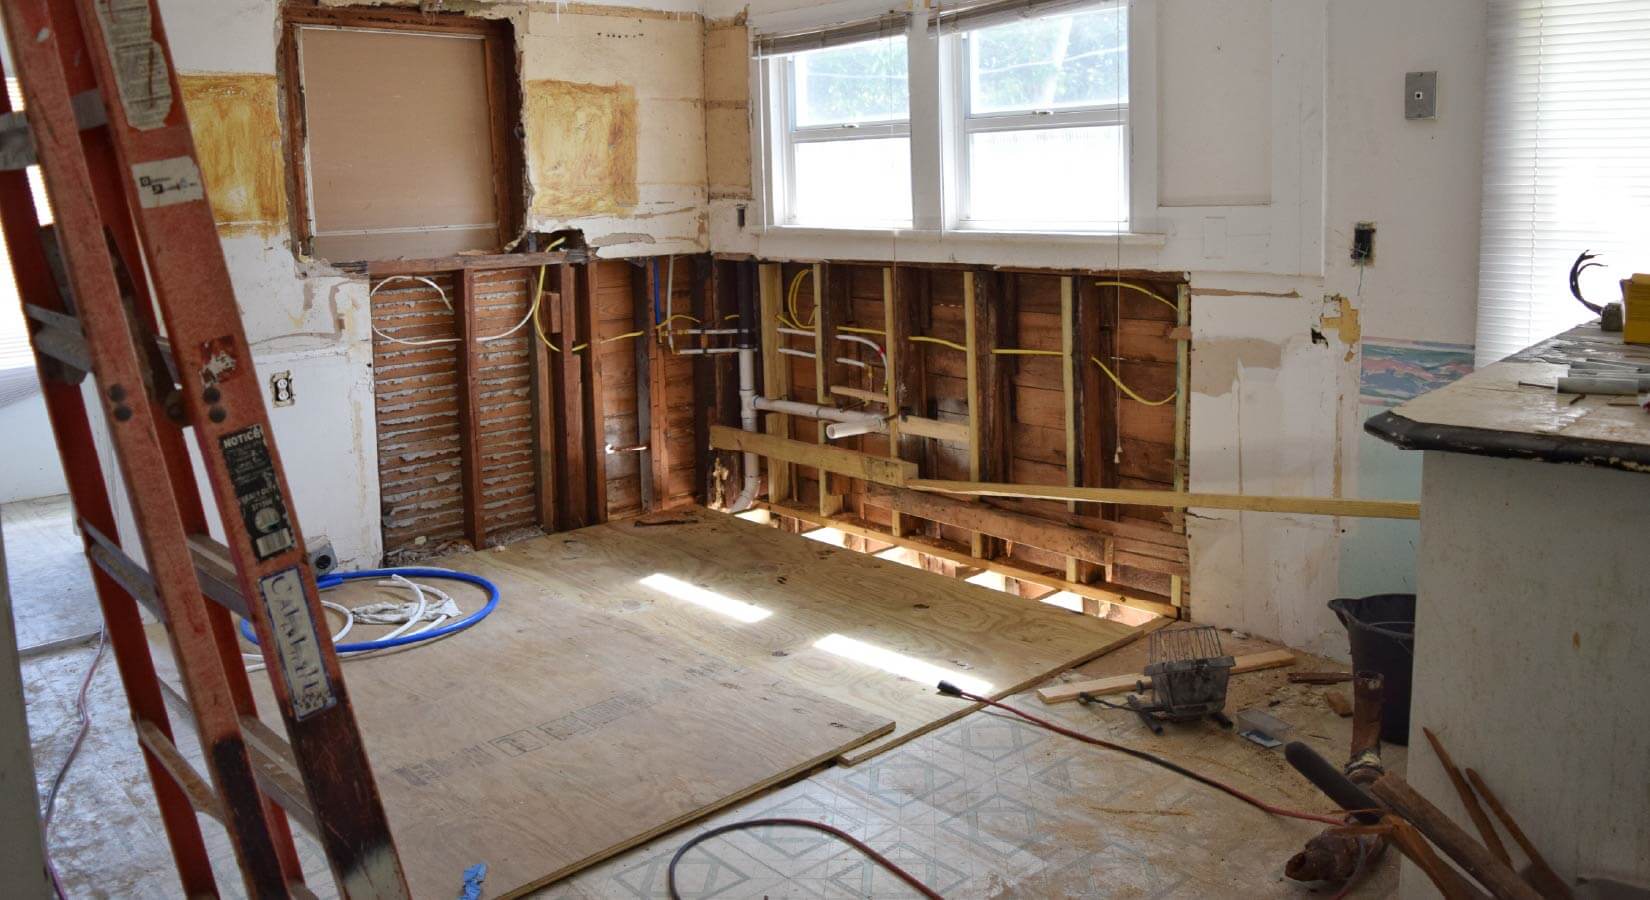 Kitchen in the middle of renovation with open walls containing wires and pipes.